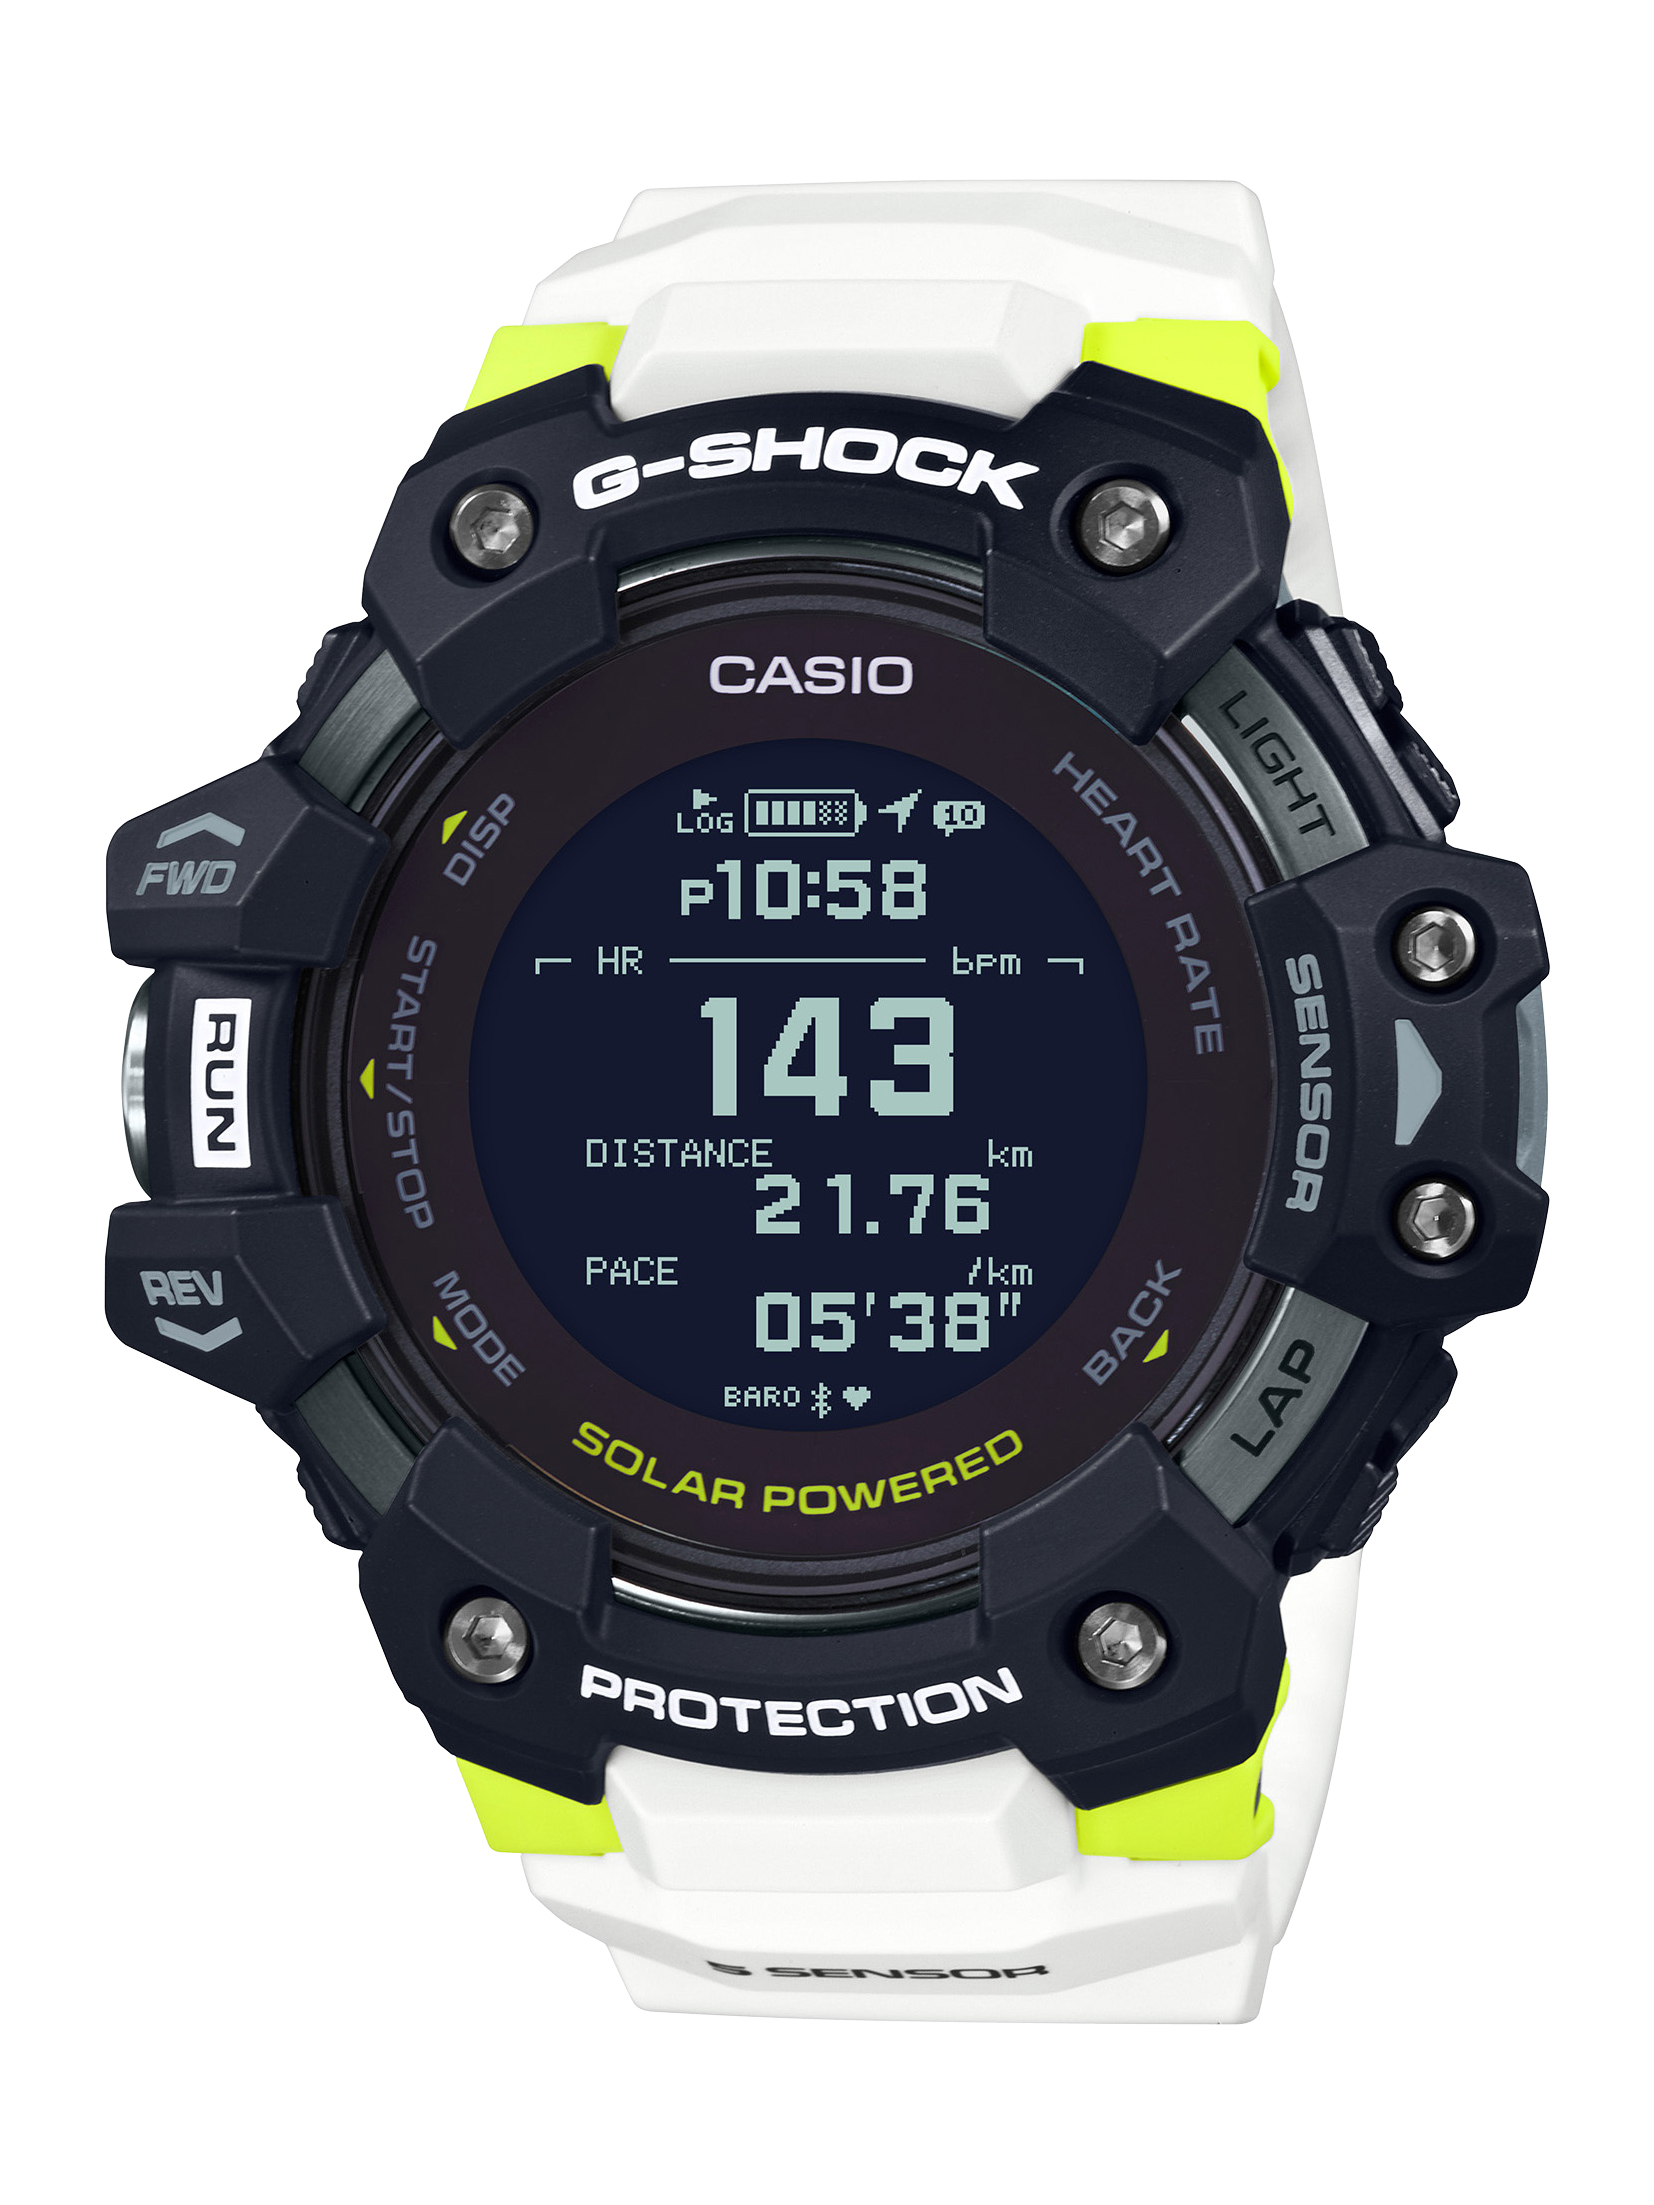 New G-Shock Move featuring the line's first heart sensor.